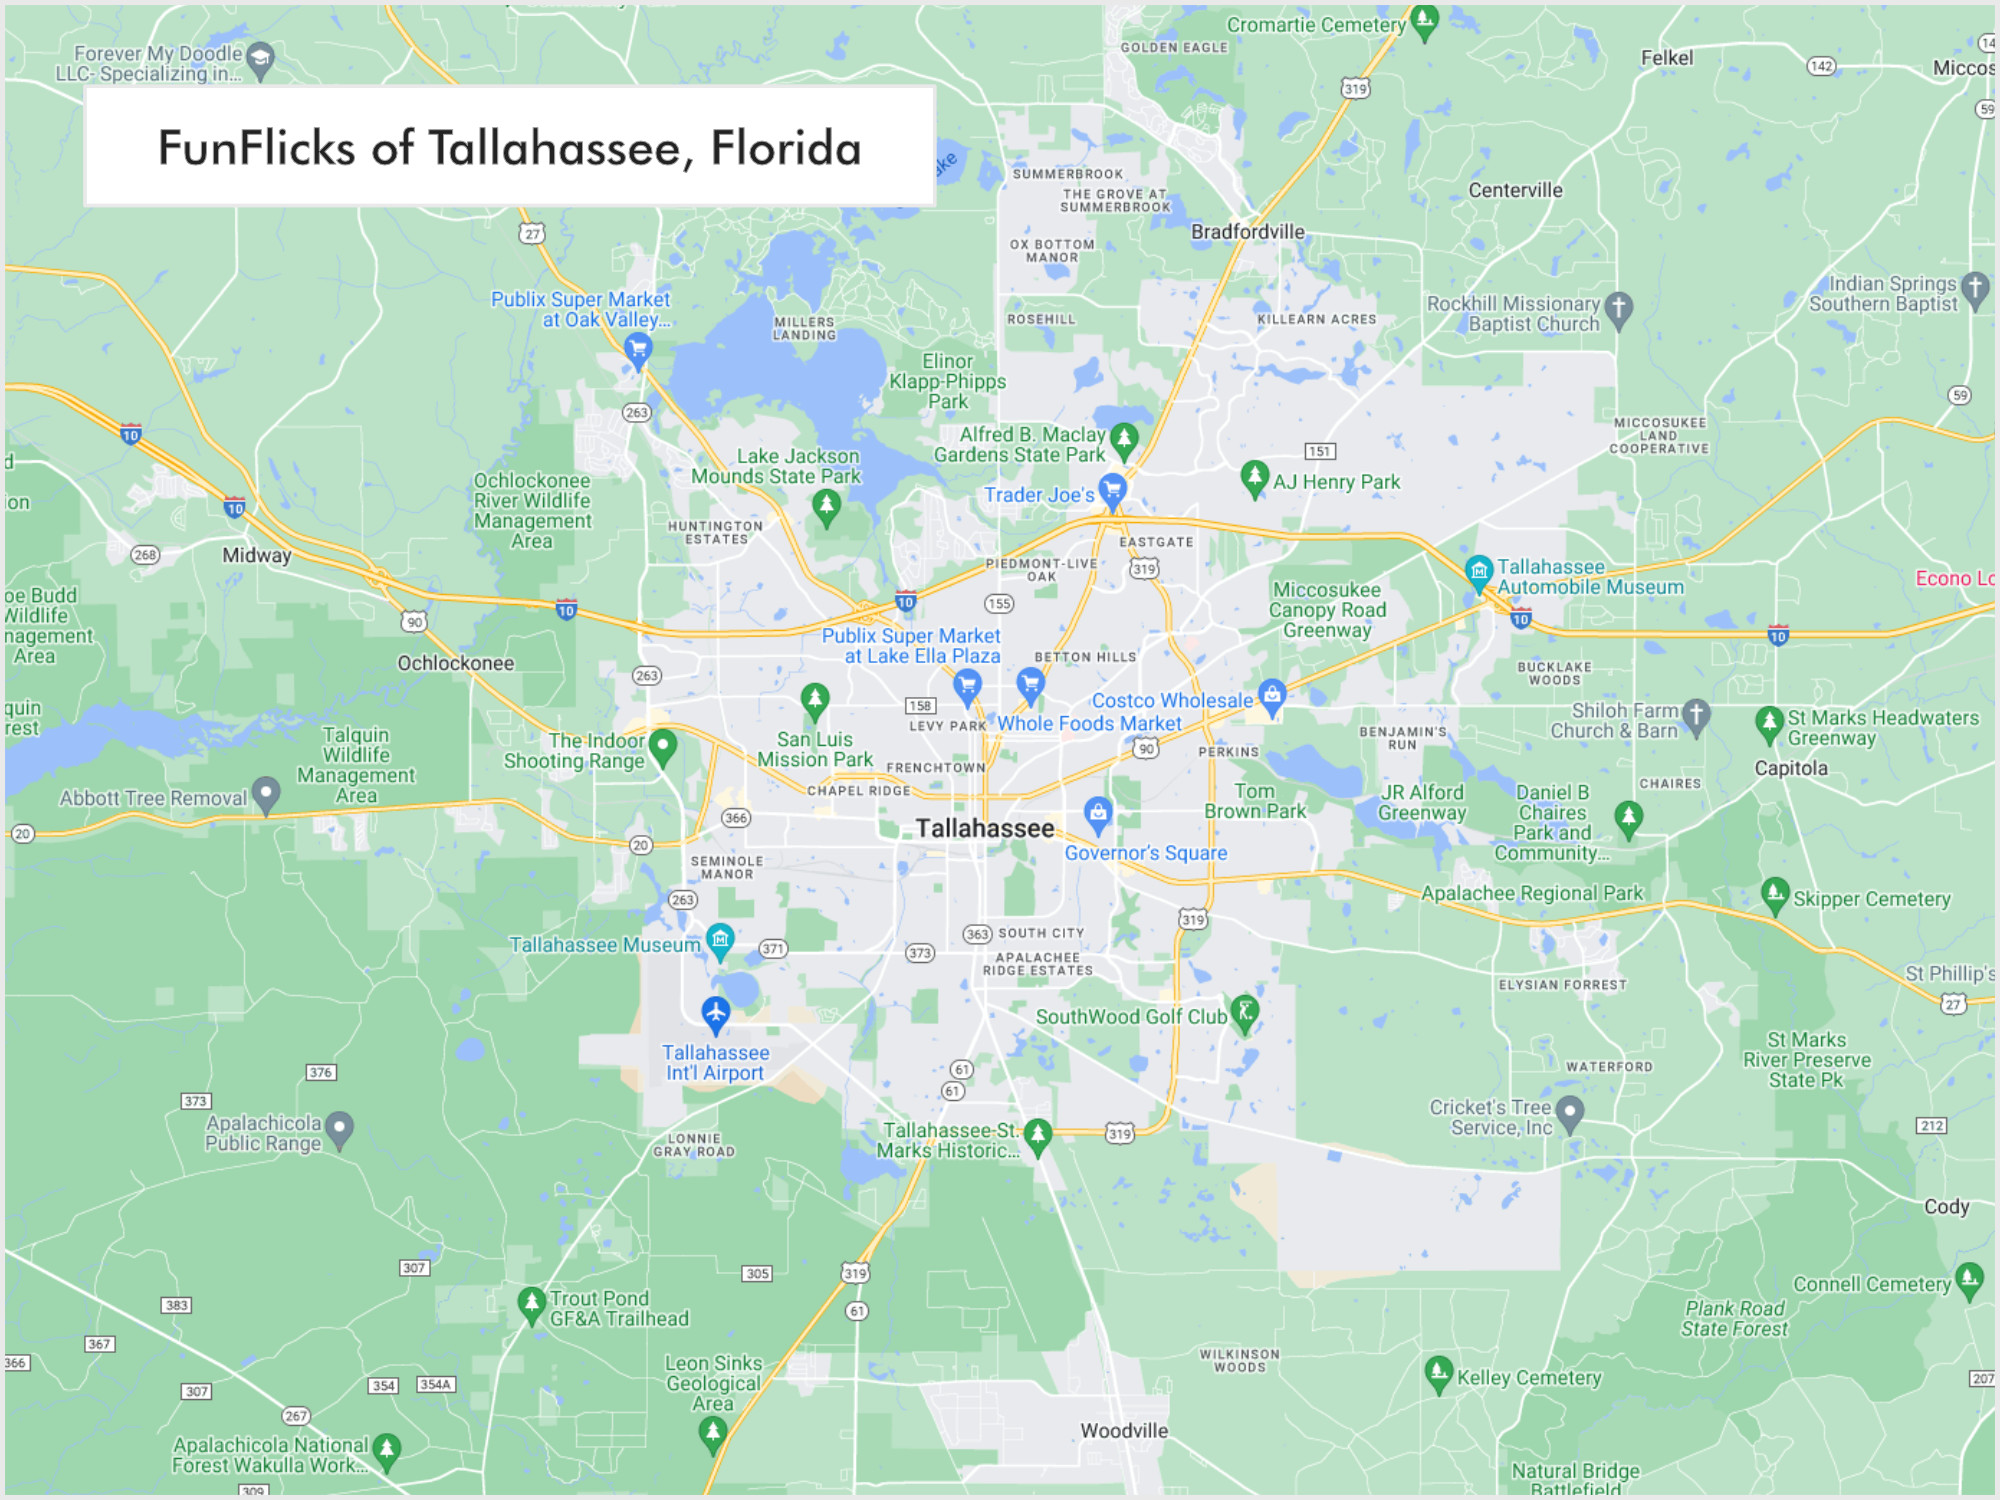 FunFlicks® Tallahassee territory map